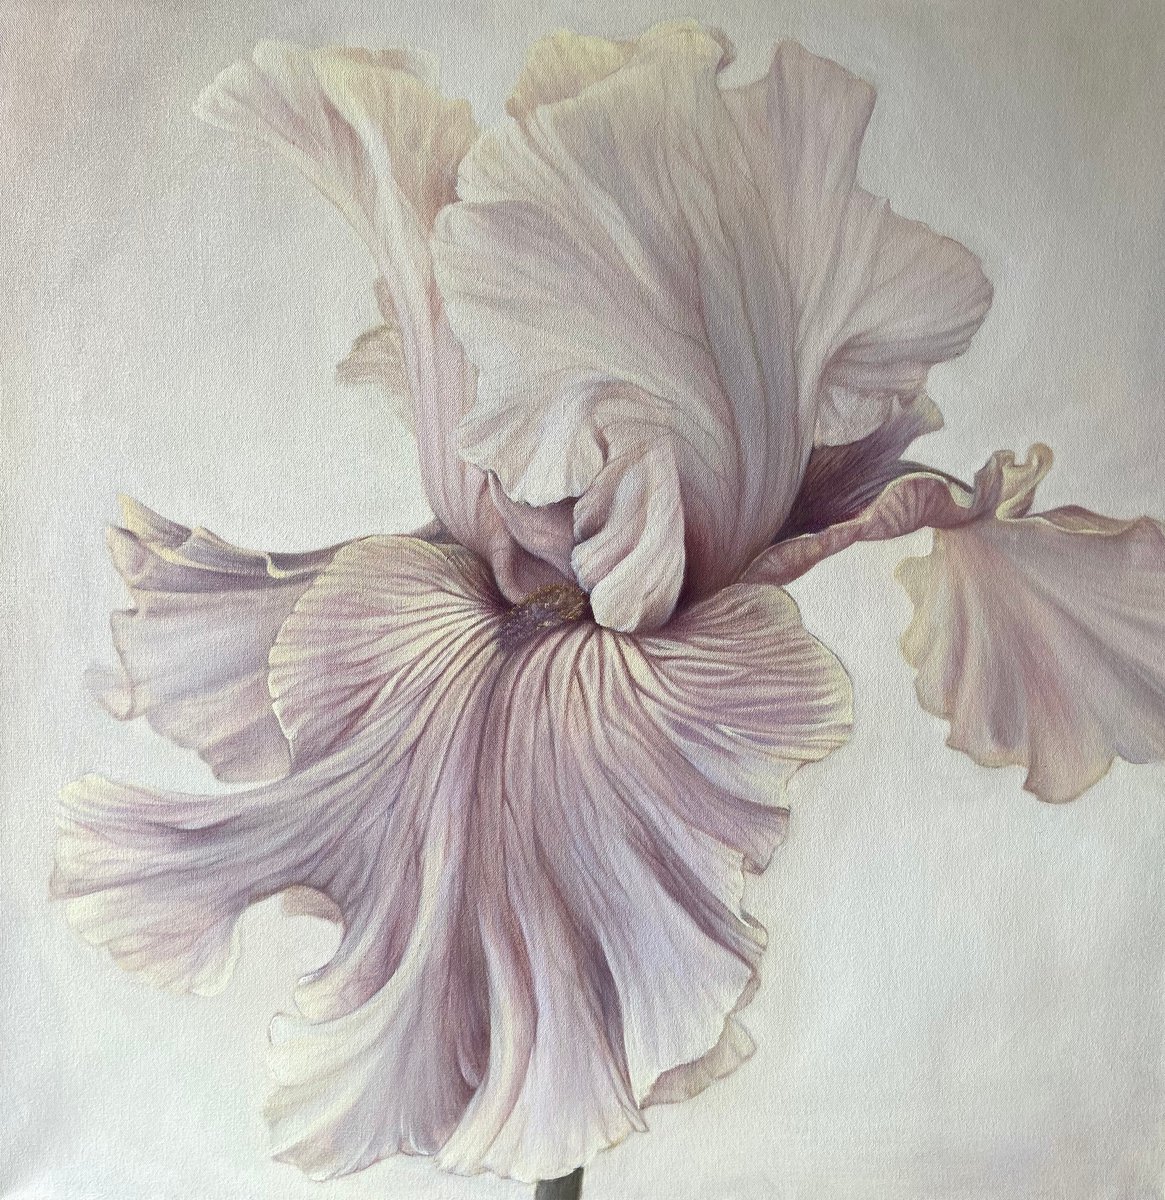 Oil painting on canvas 80/80 “Silk and wind” Oil painting by Alexandra ...